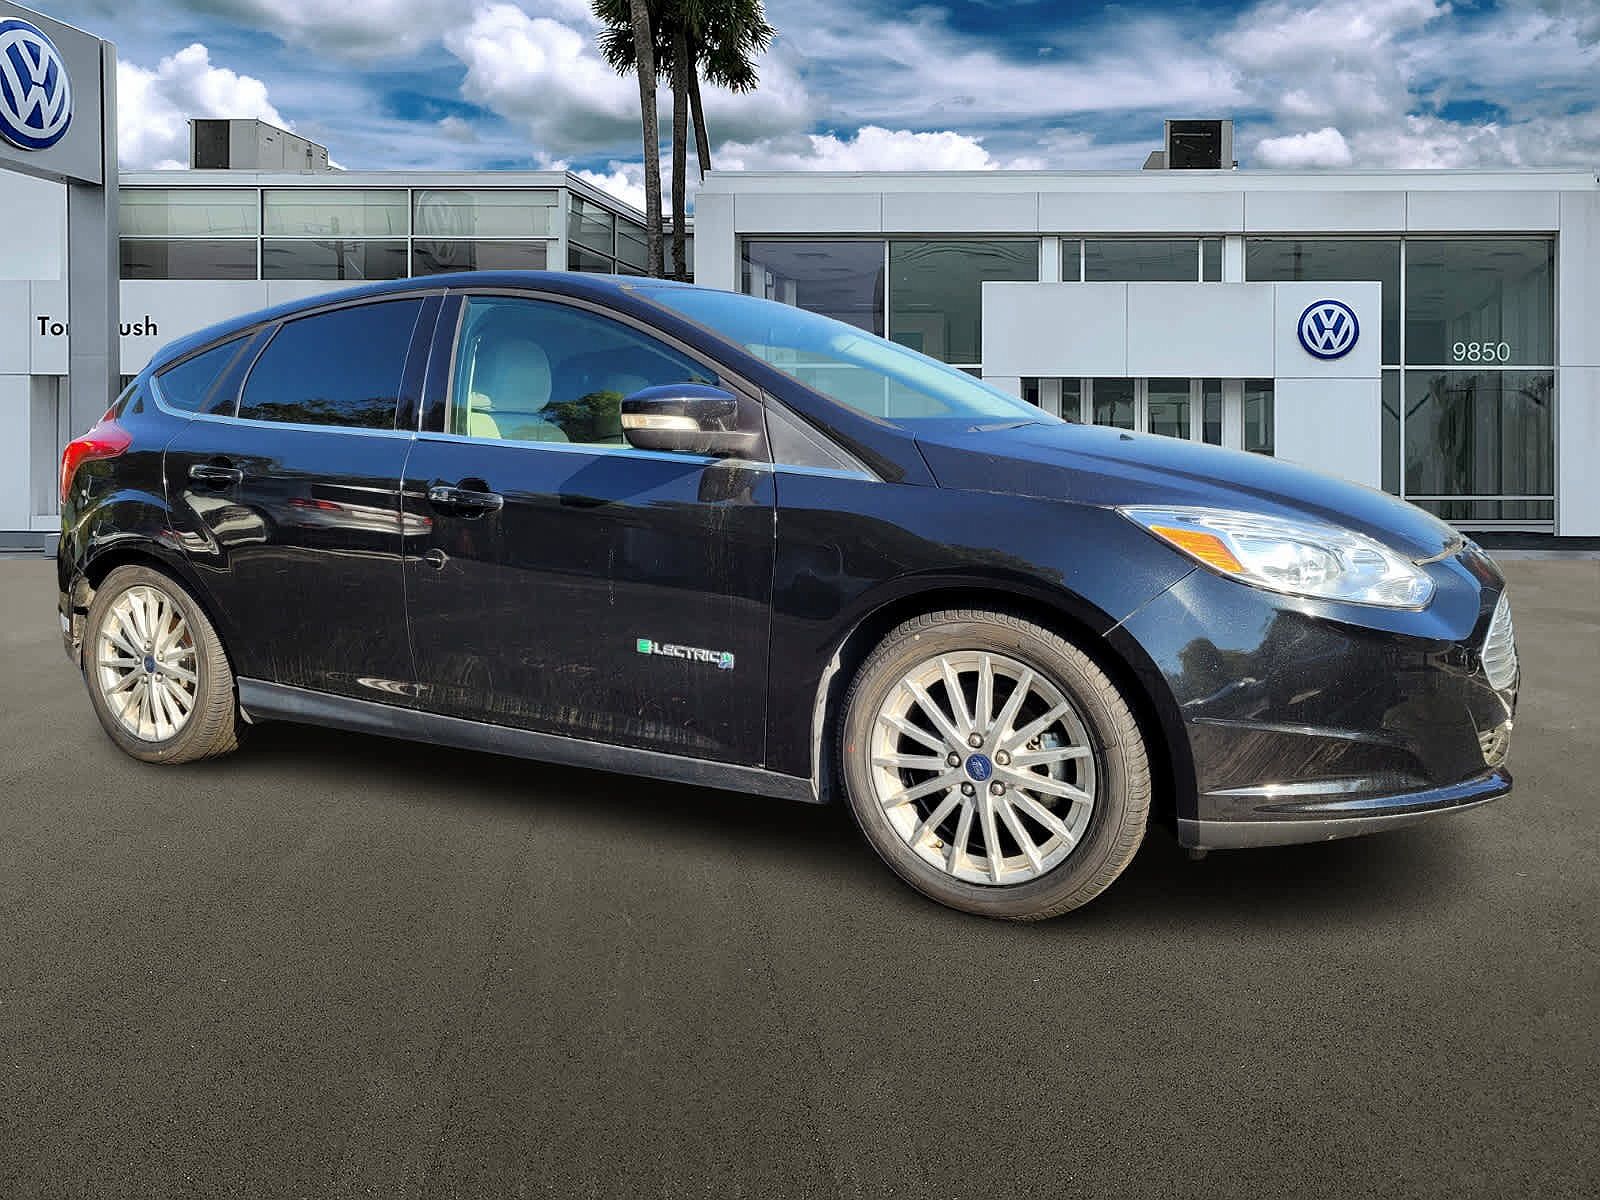 2013 Ford Focus Electric image 0